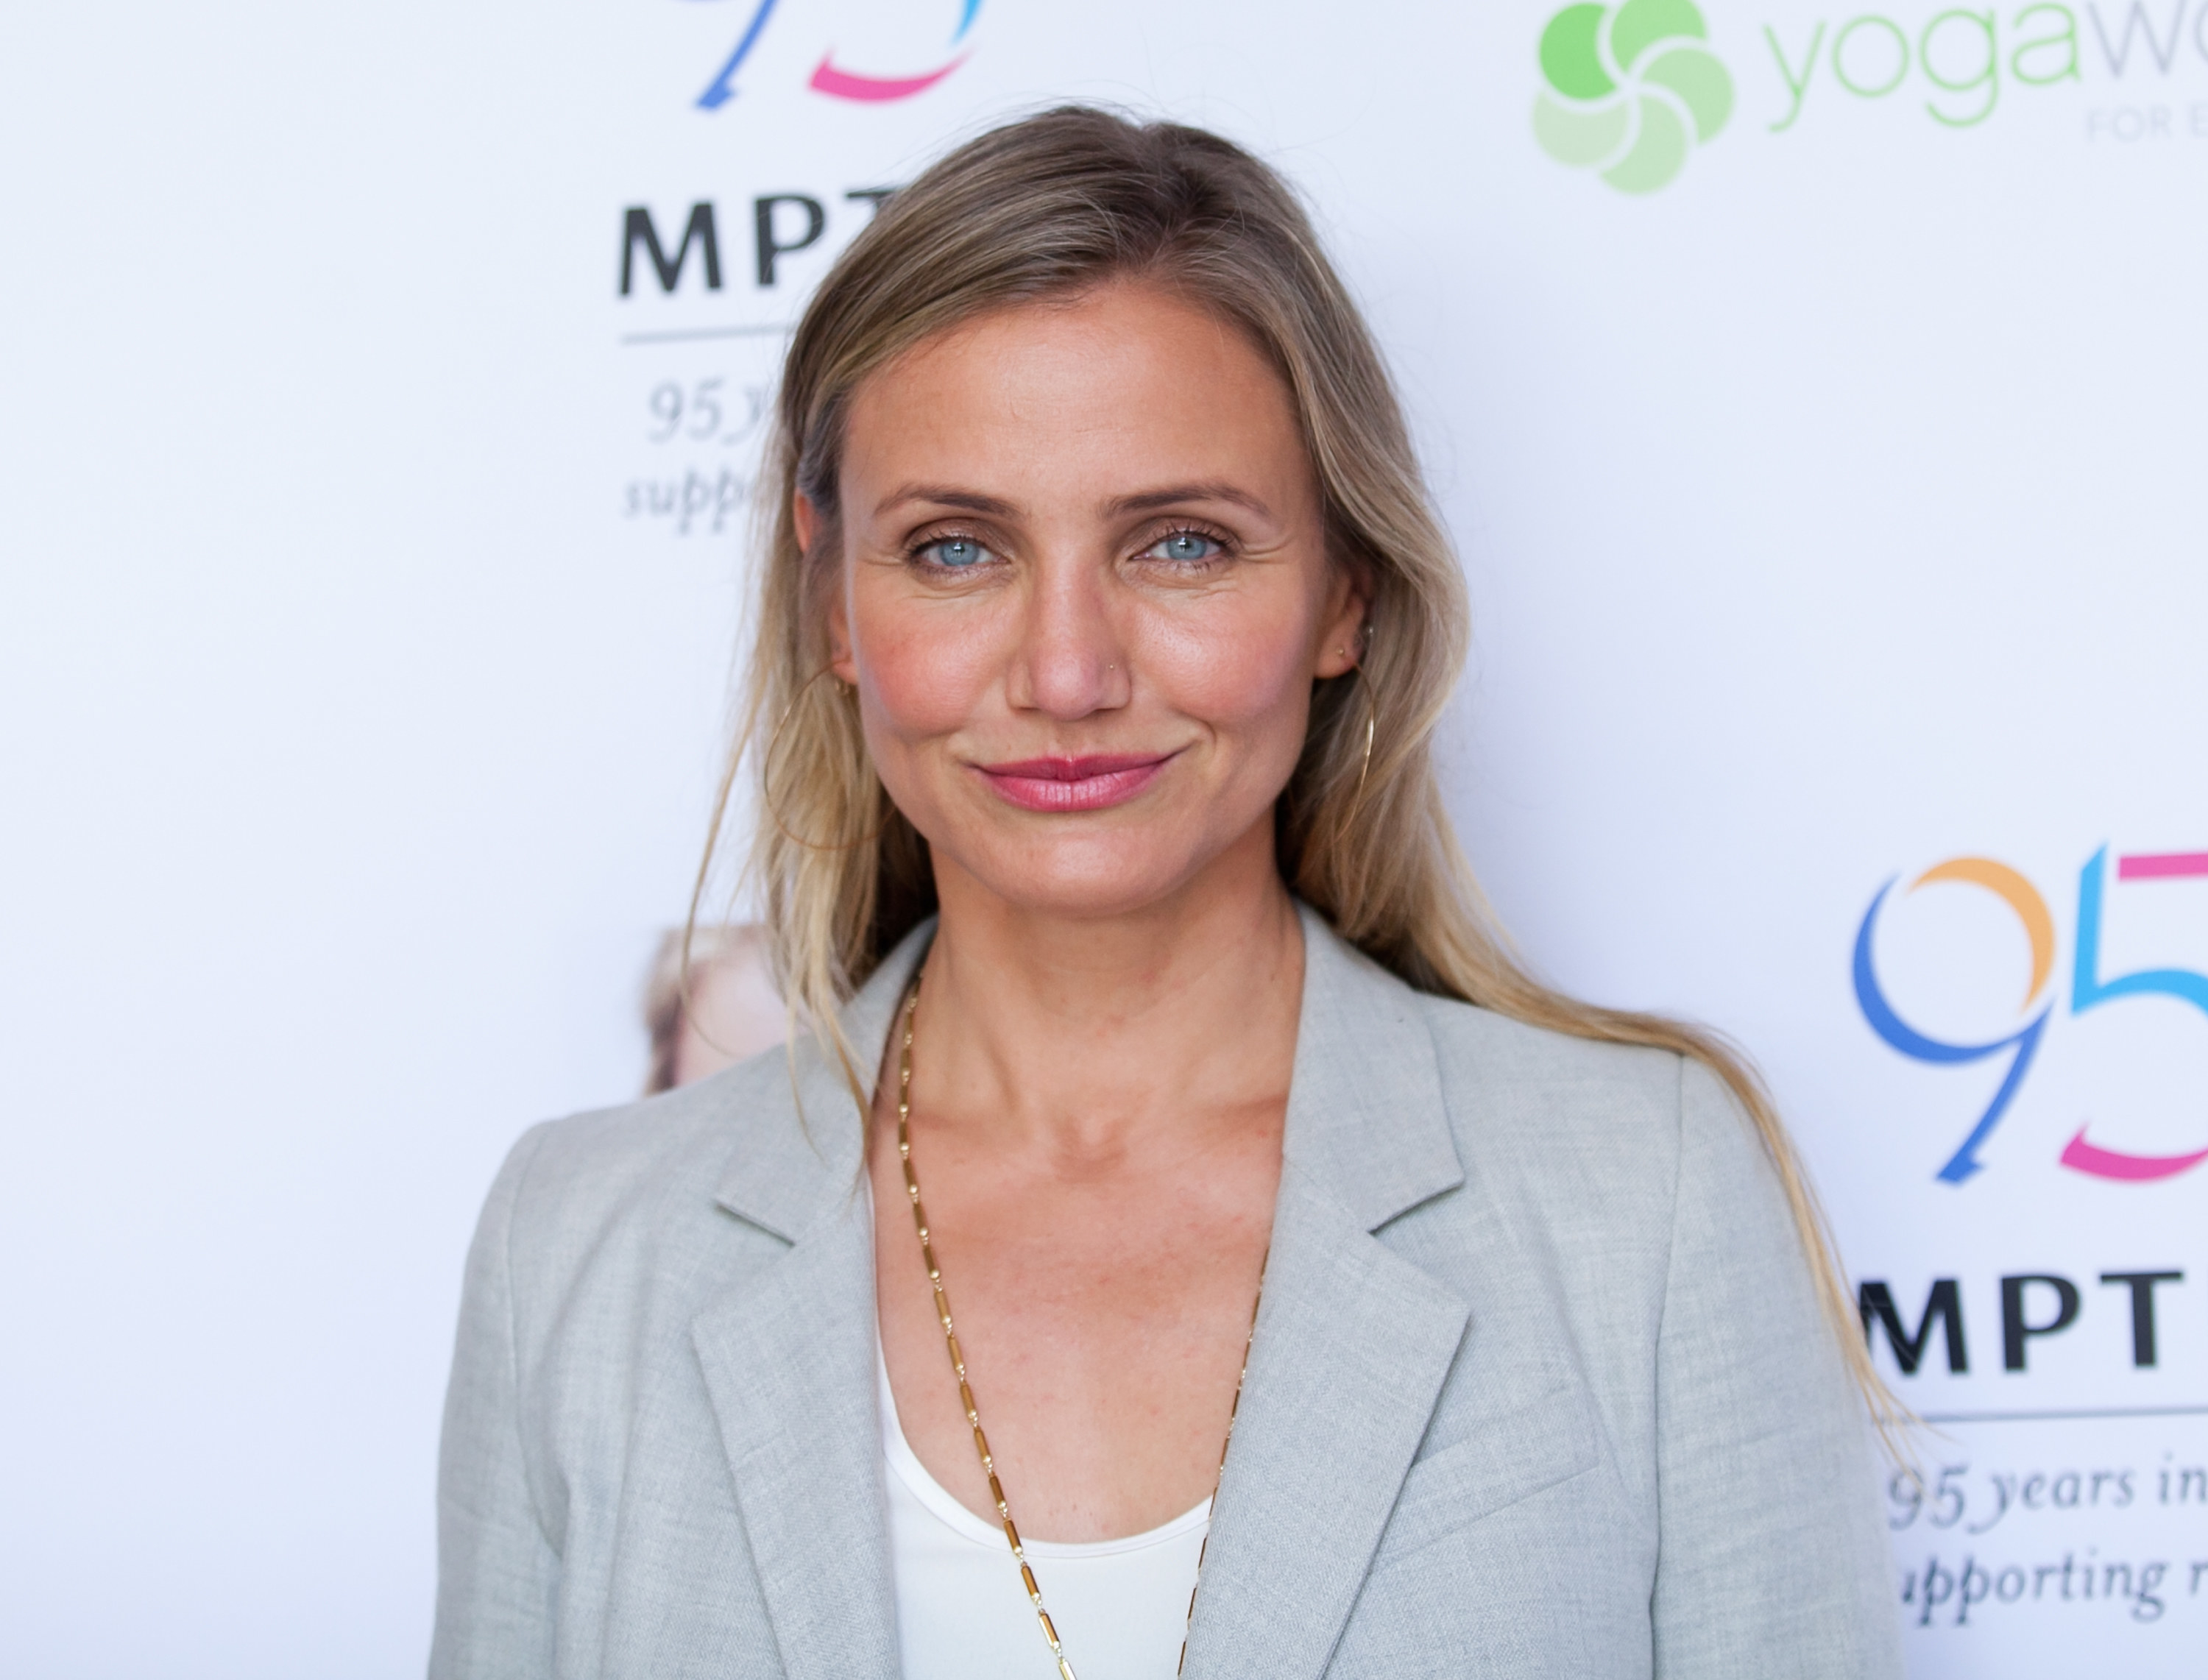 Cameron Diaz attends the MPTF Celebration for health and fitness at The Wasserman Campus on June 10, 2016 in Woodland Hills, California